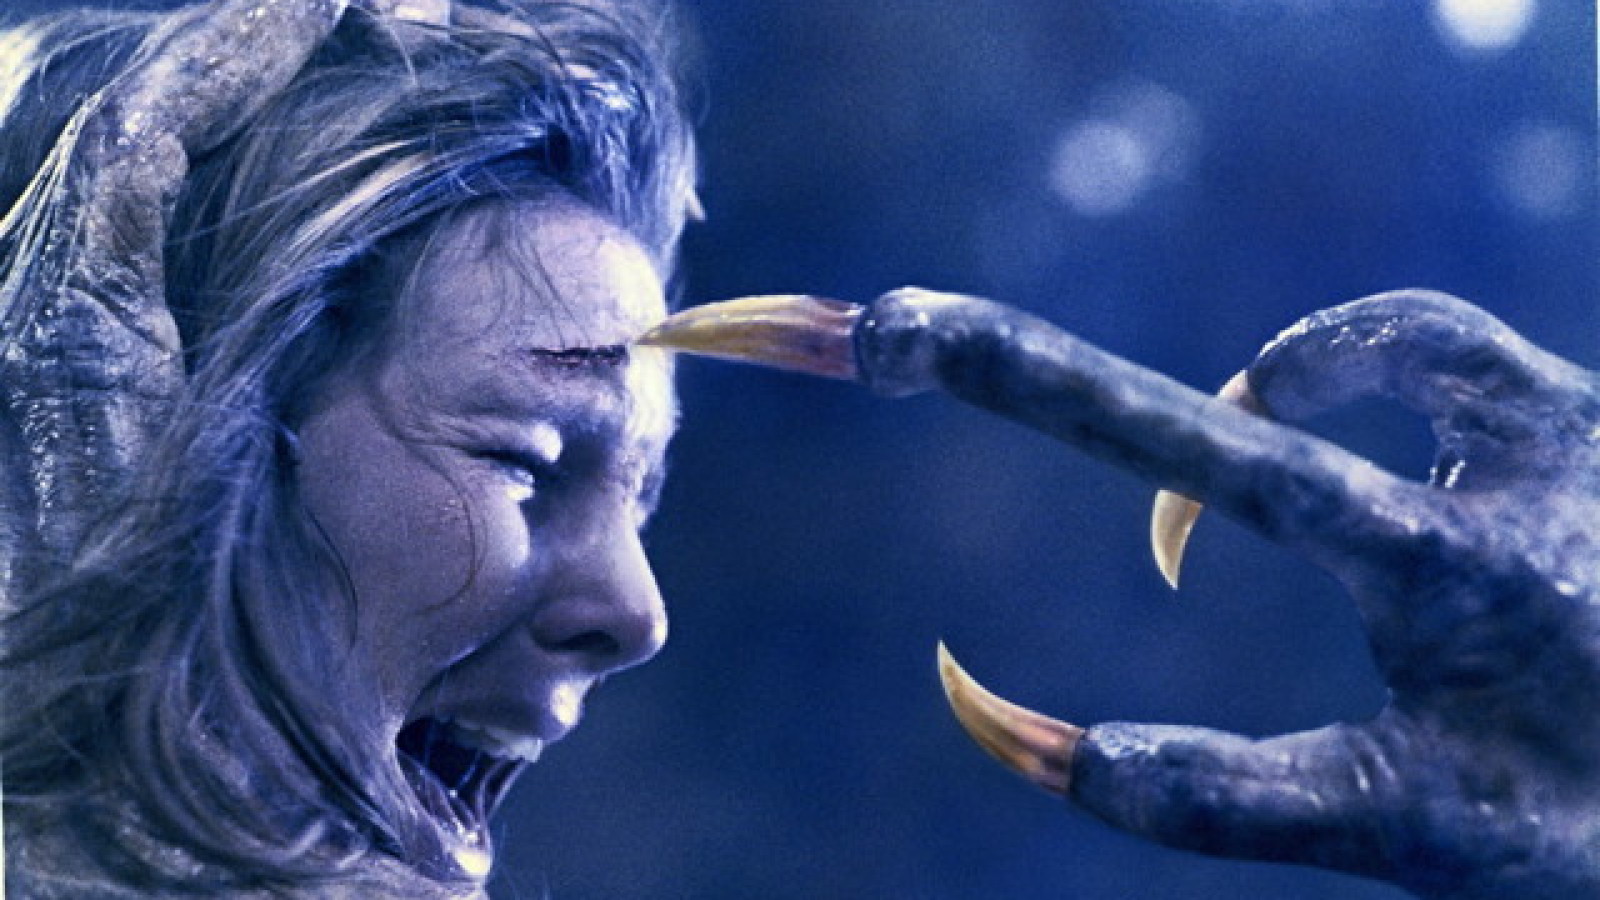 This is a still from the movie Pumpkinhead.